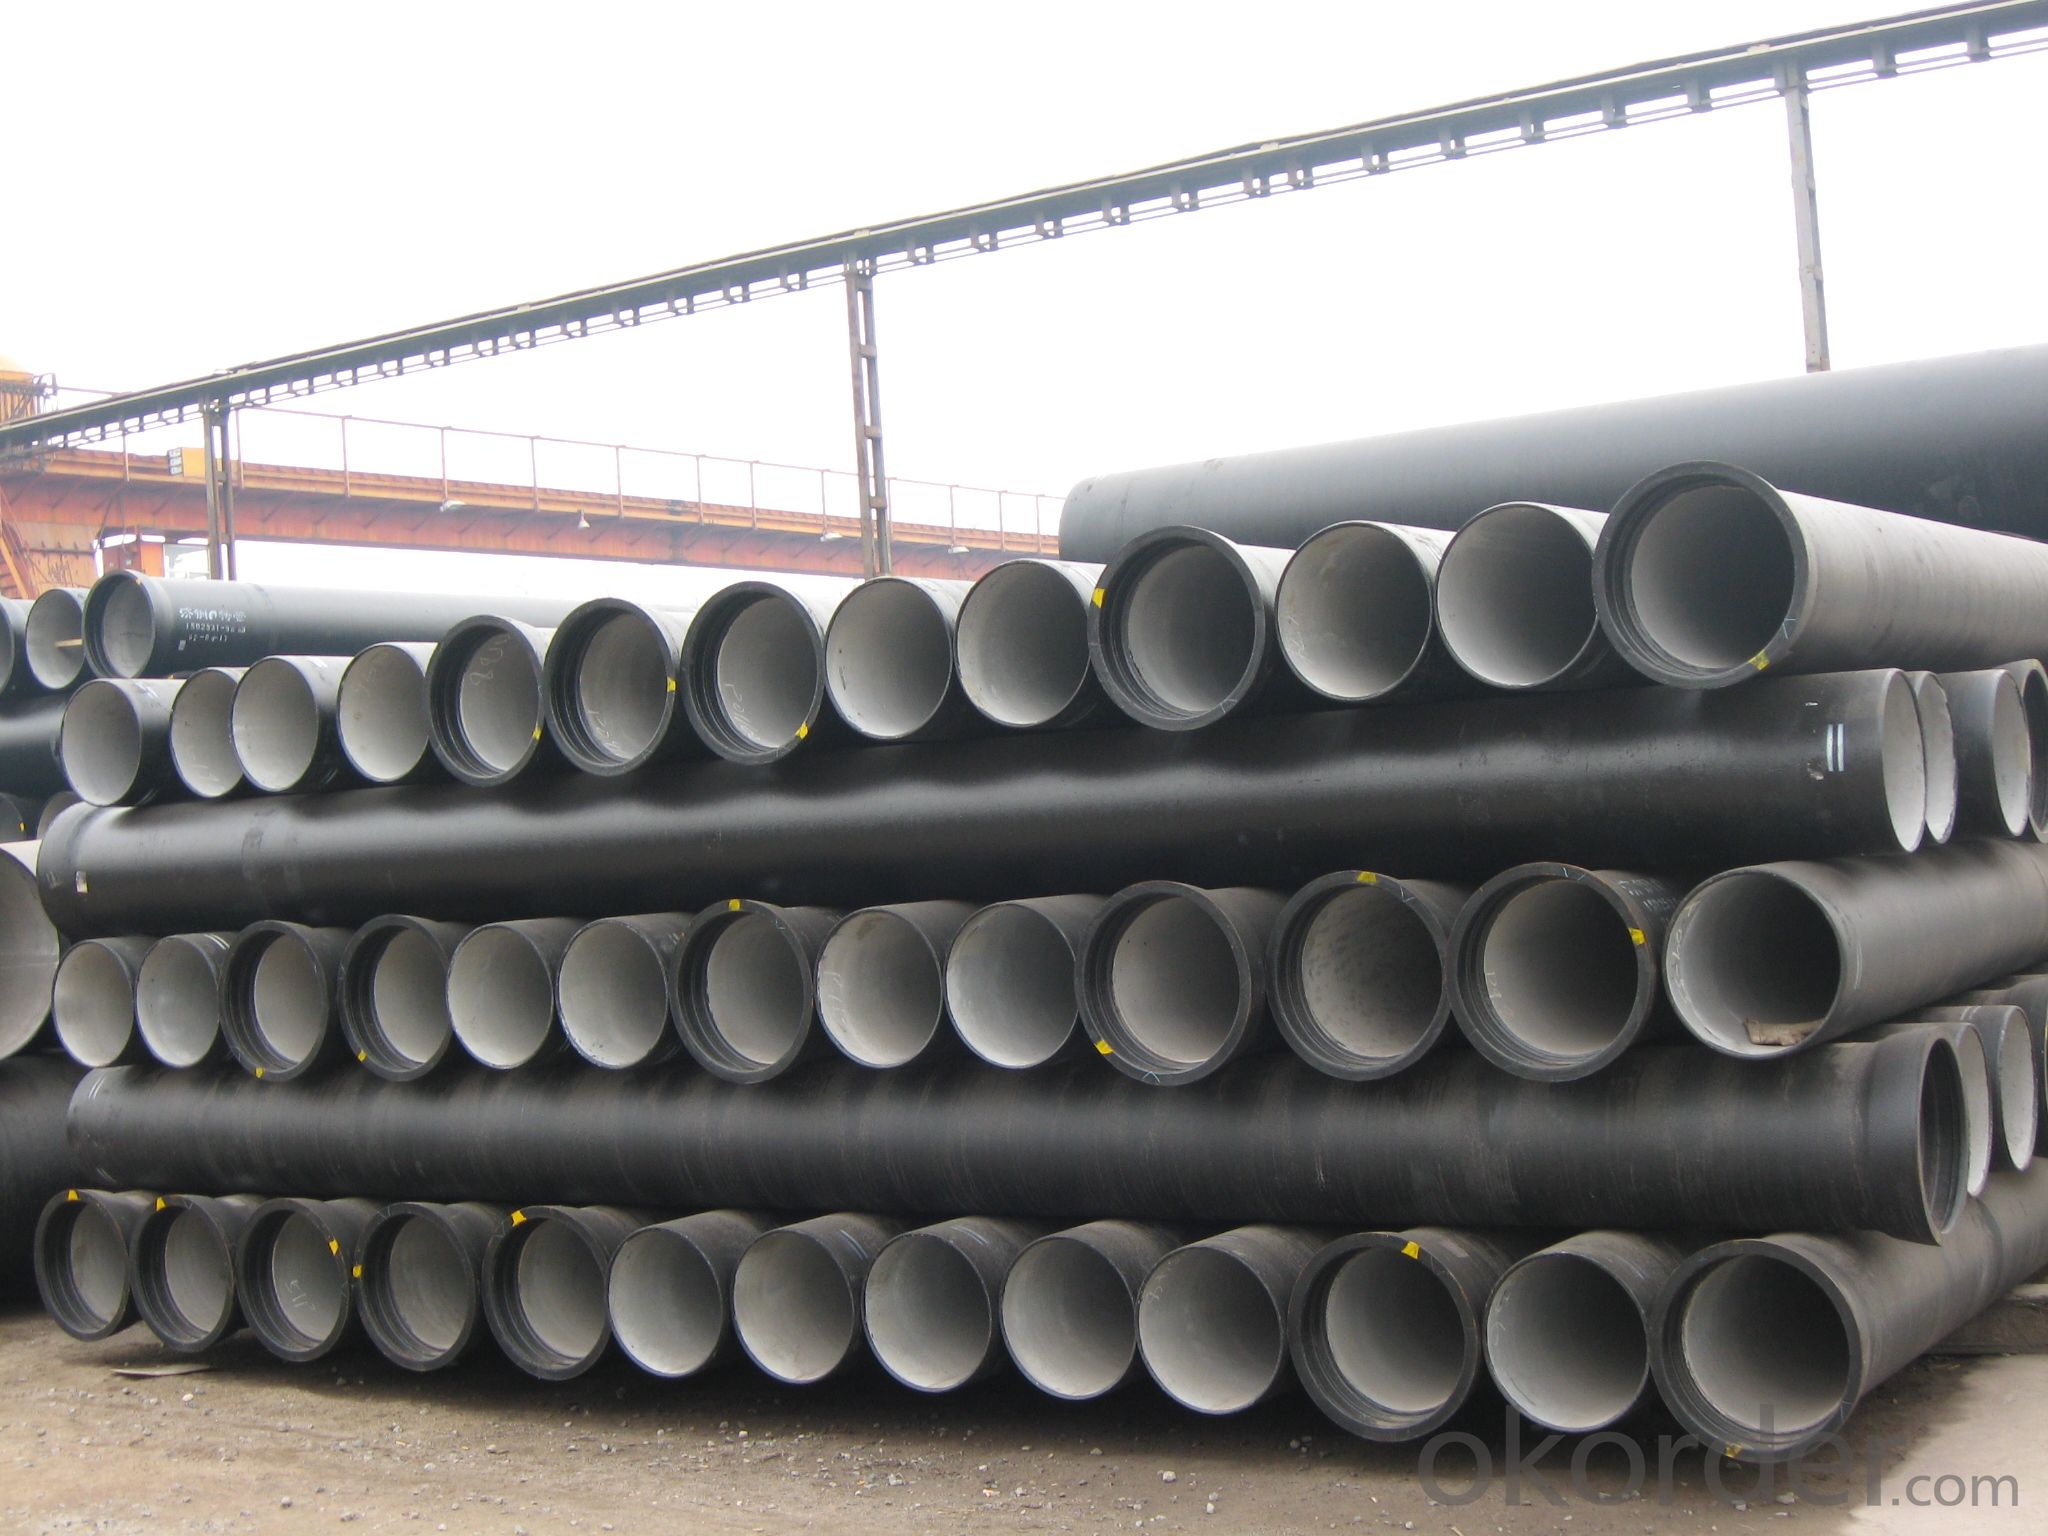 Ductile Iron Pipe Malaysia : Ductile iron pipe - Wikiwand : We are the